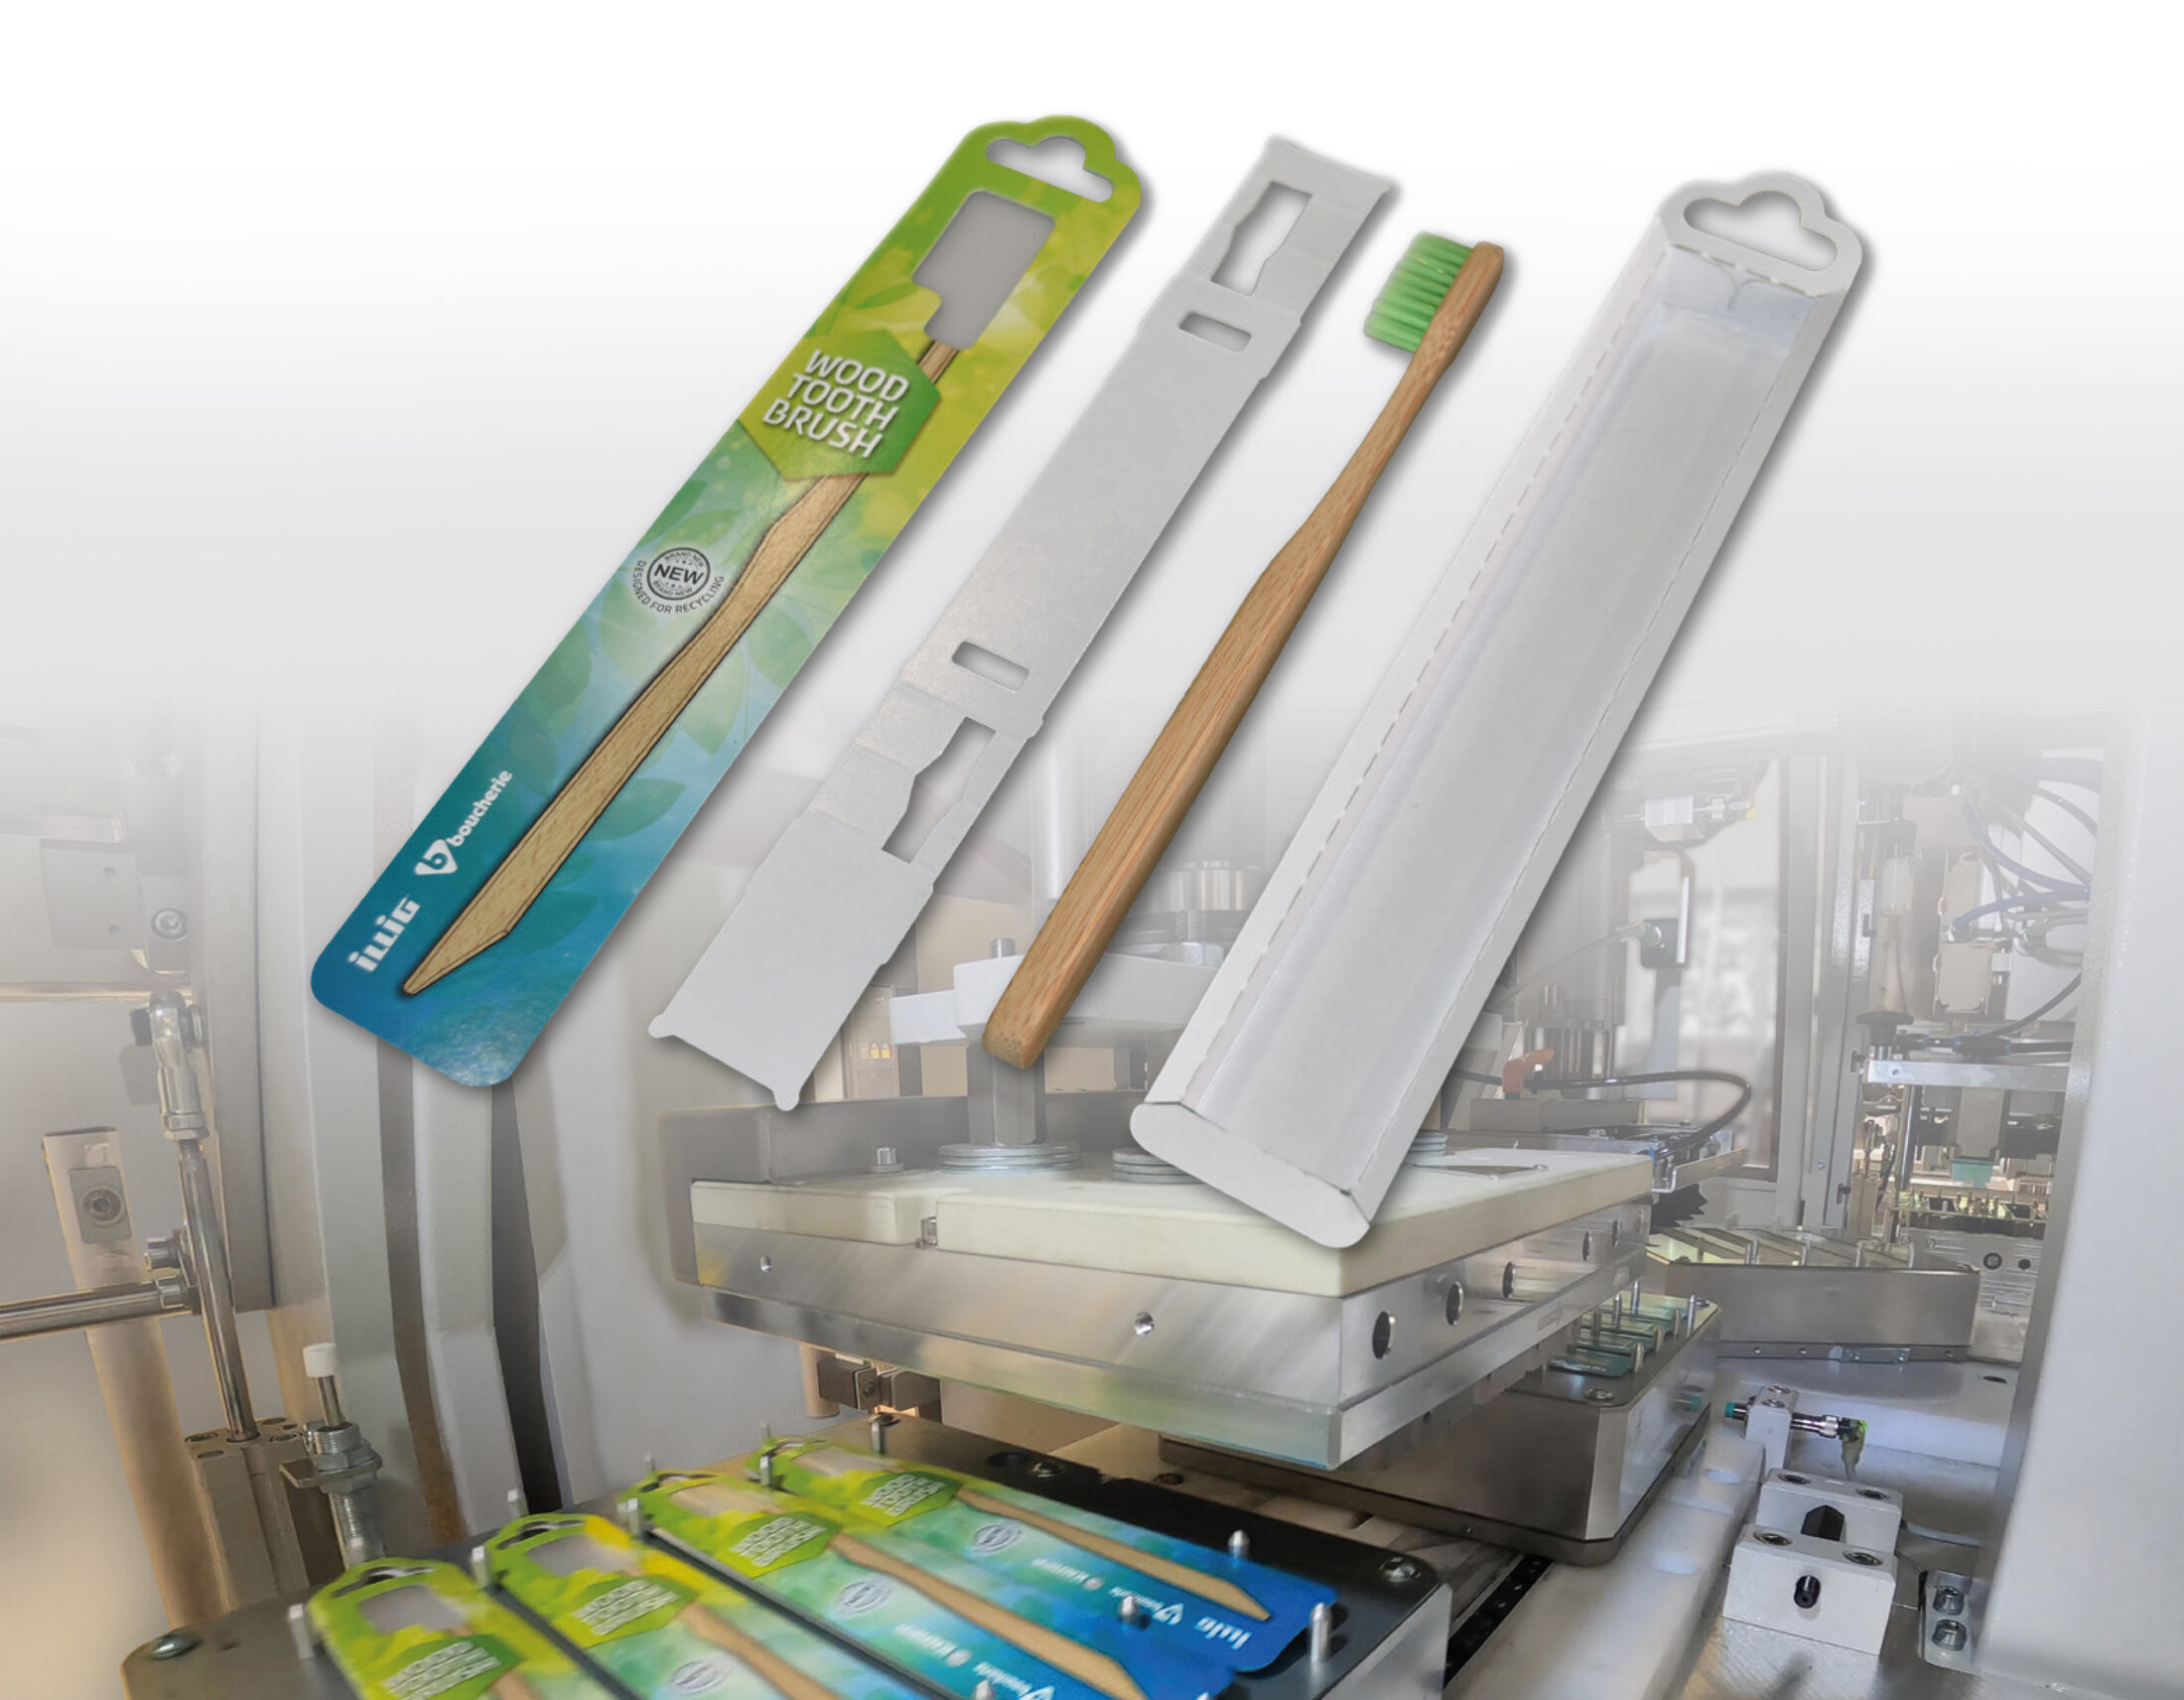 ILLIG's HSU 35b flexible packaging system is suitable for sustainable blister packaging made of solid cardboard with inlay for product fixation. | © ILLIG Maschinenbau GmbH